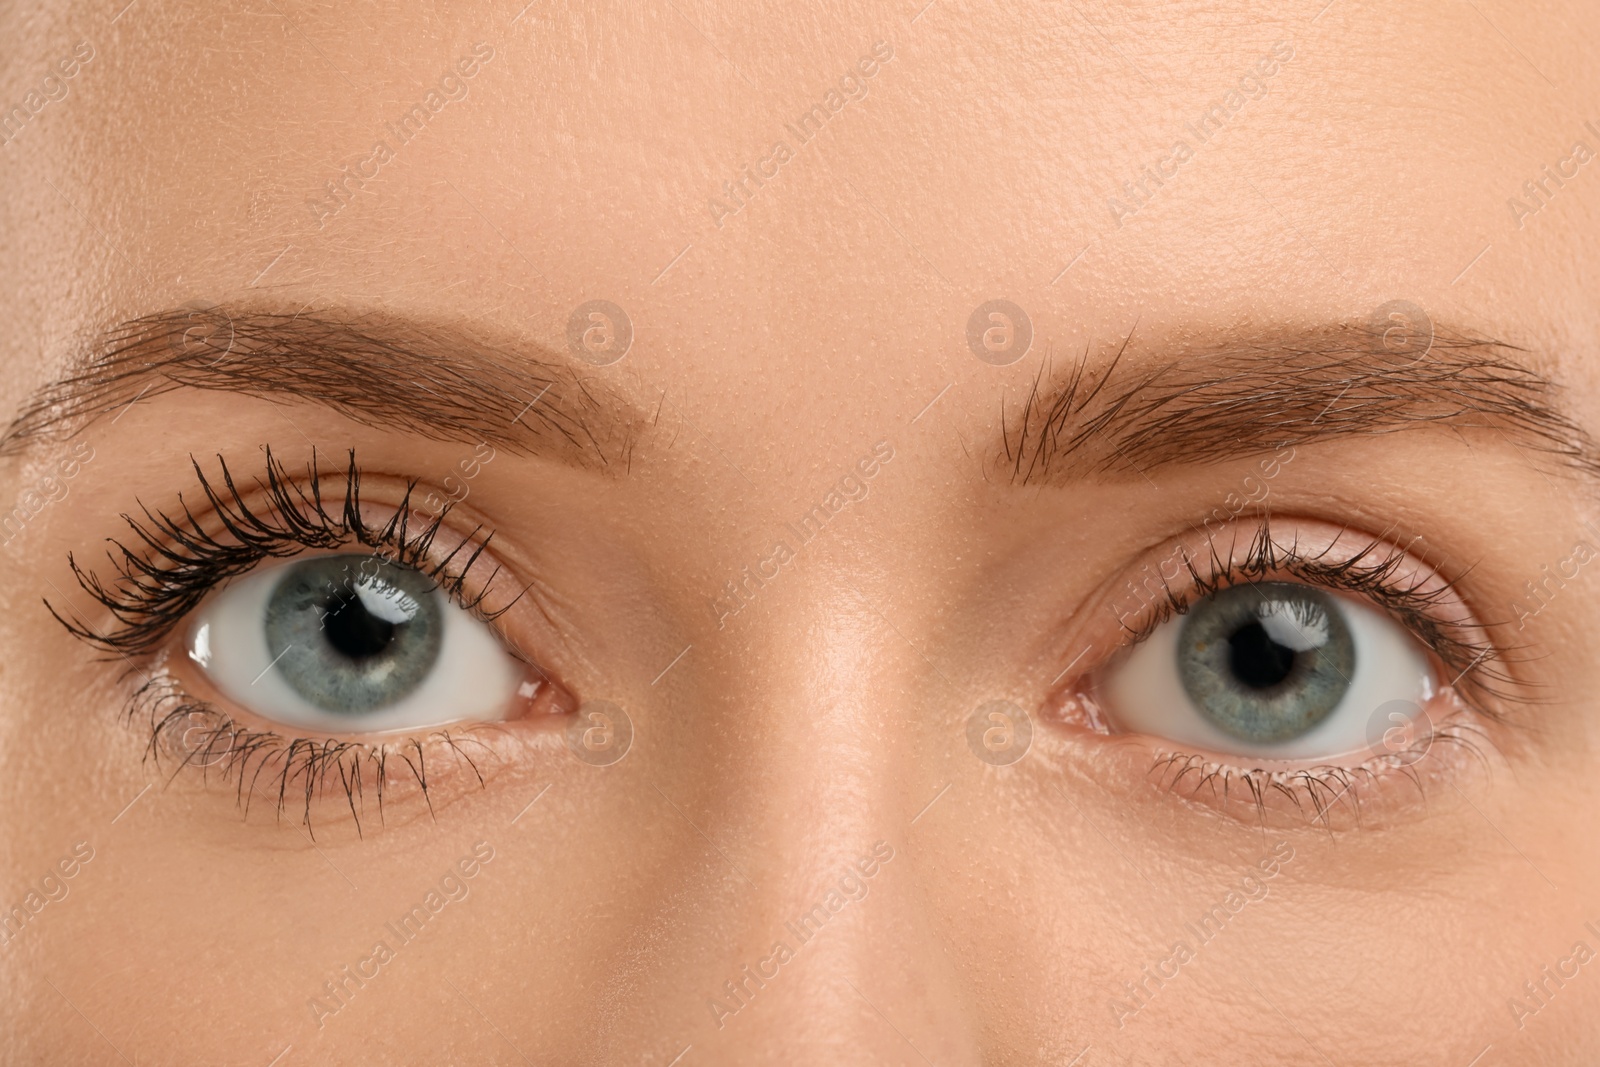 Photo of Woman showing difference in eyelashes length after mascara applying, closeup